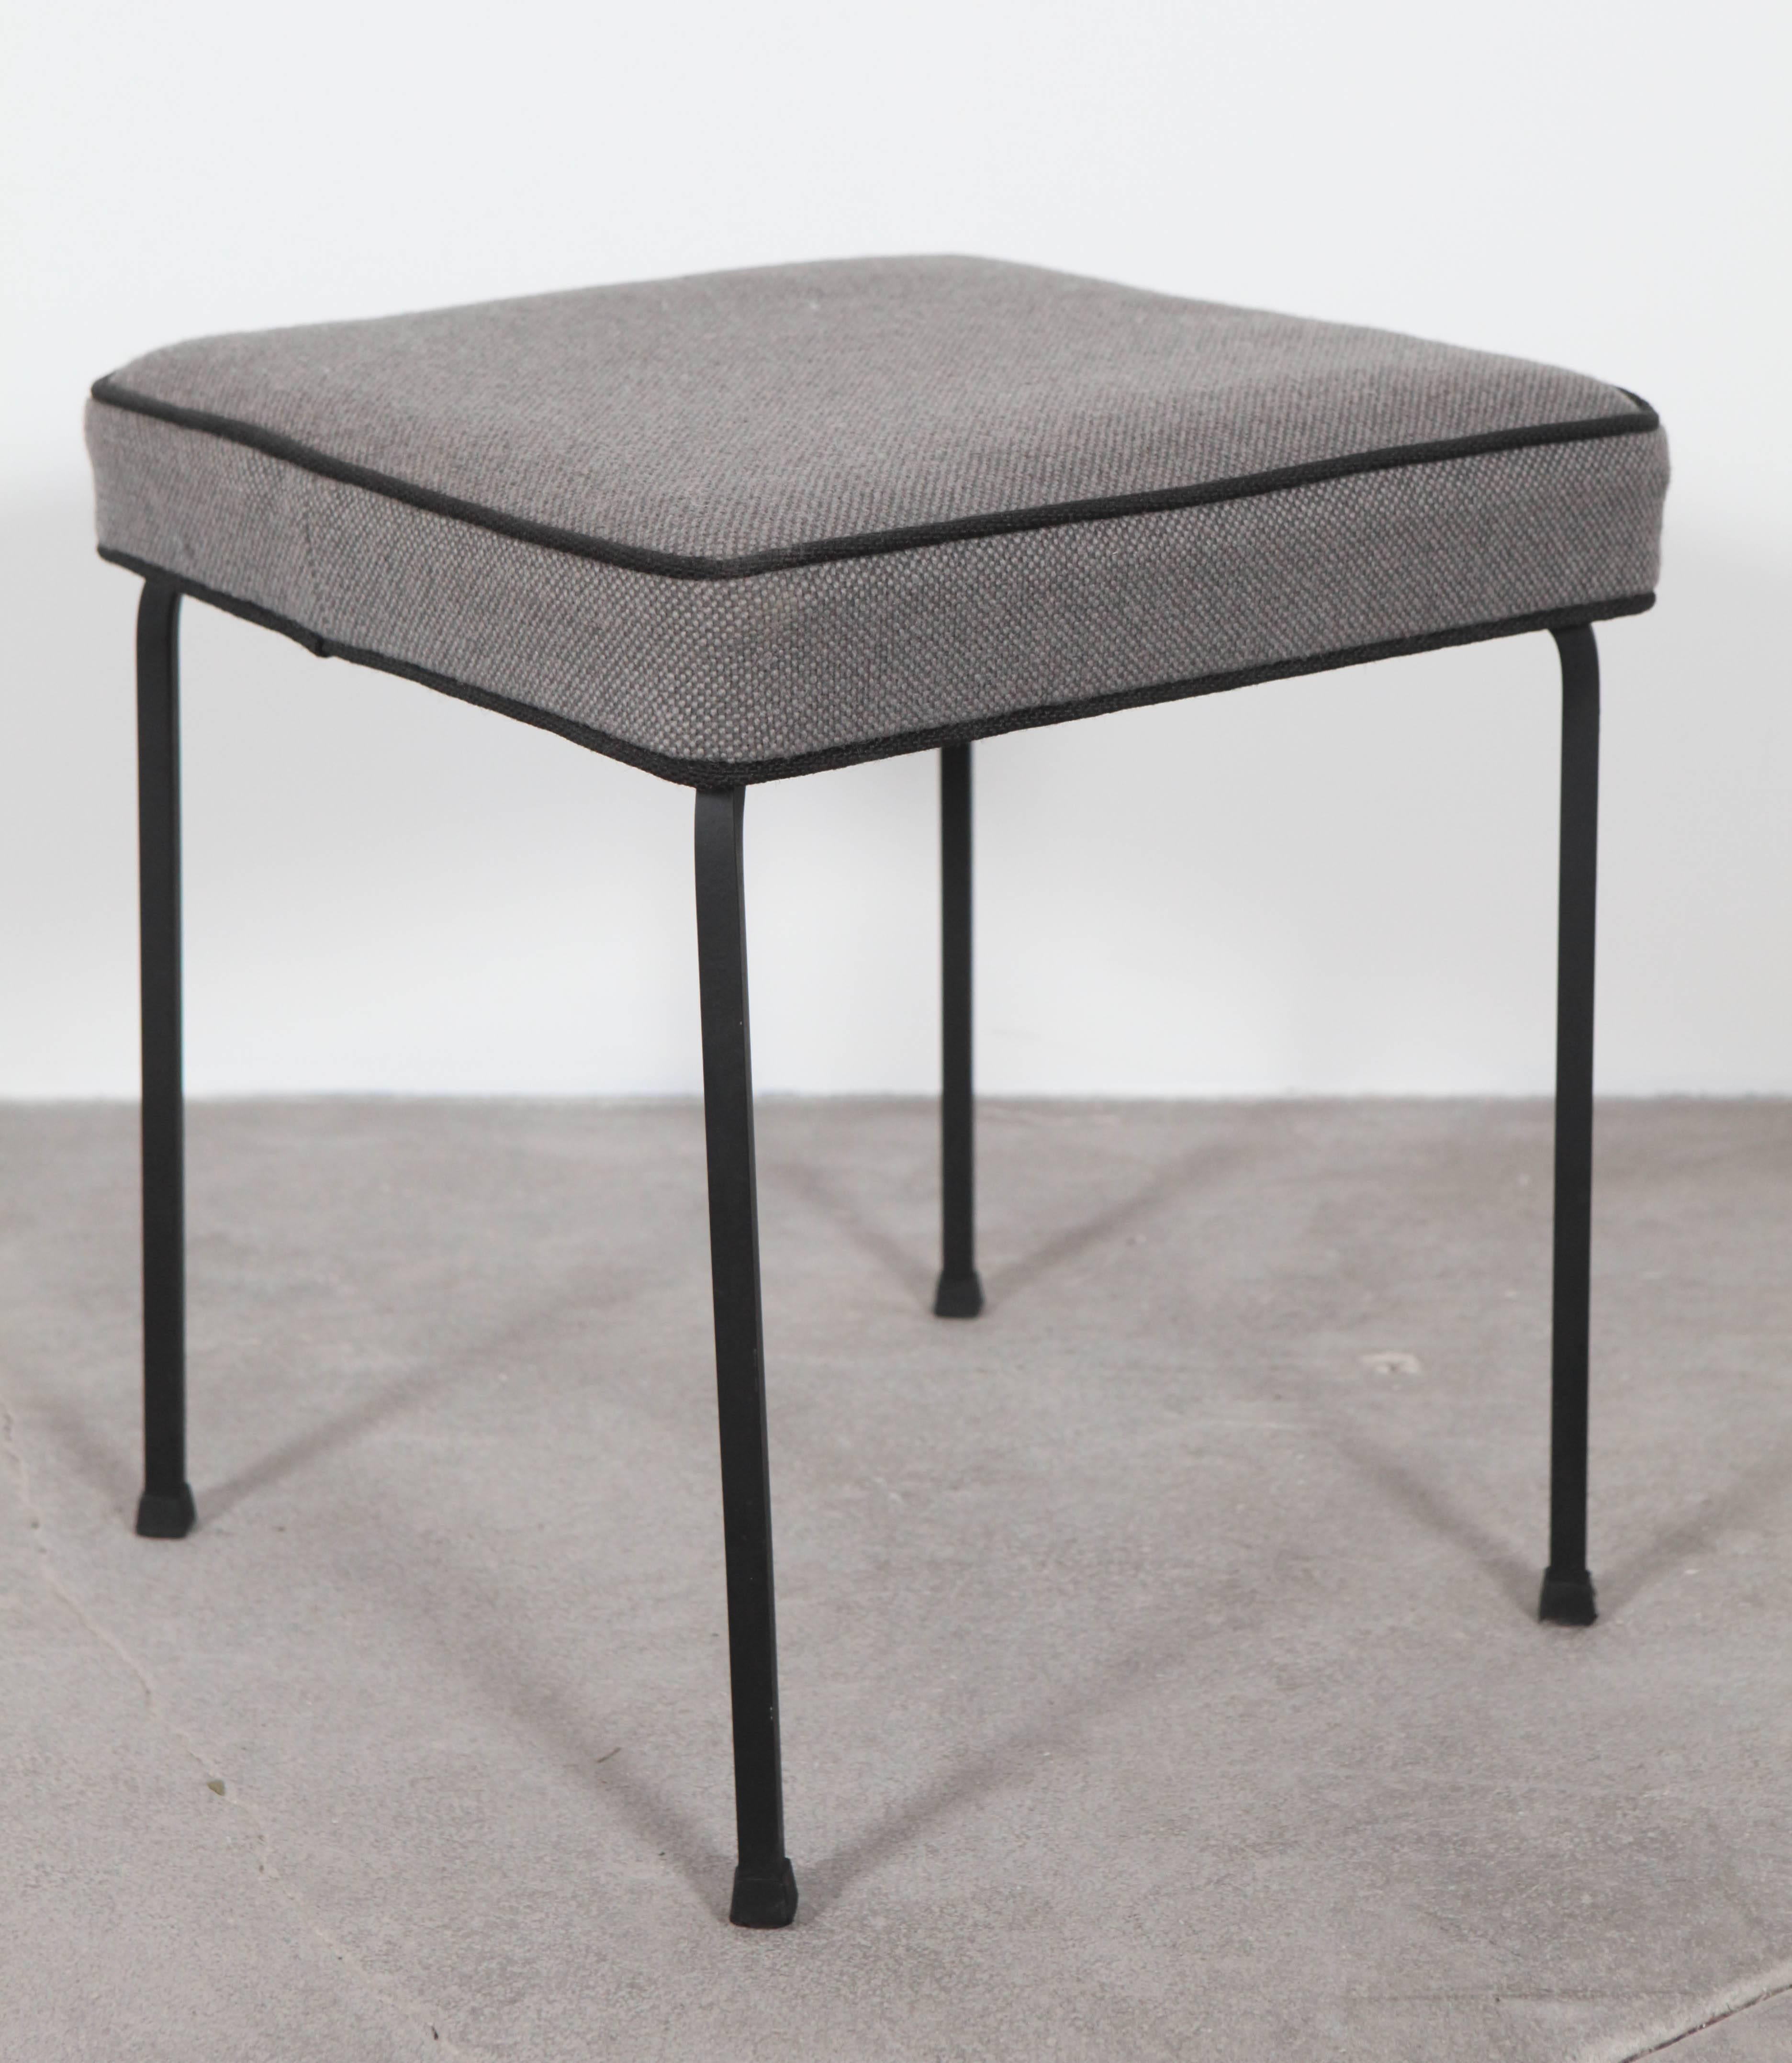 Low metal stools with upholstered grey top with black piping.